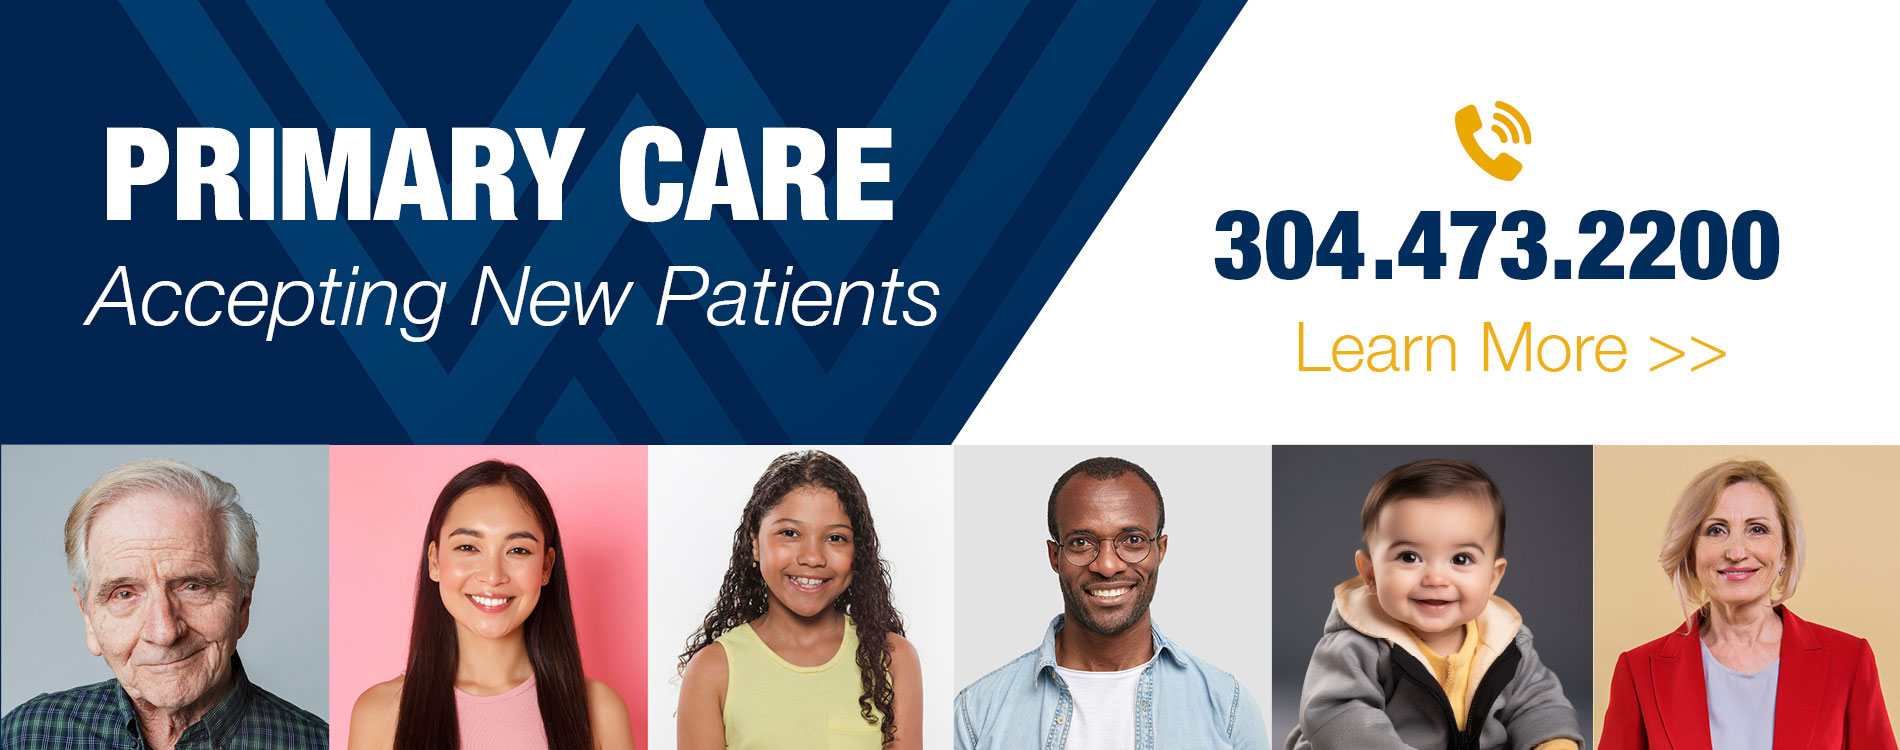 Primary Care Accepting New Patients